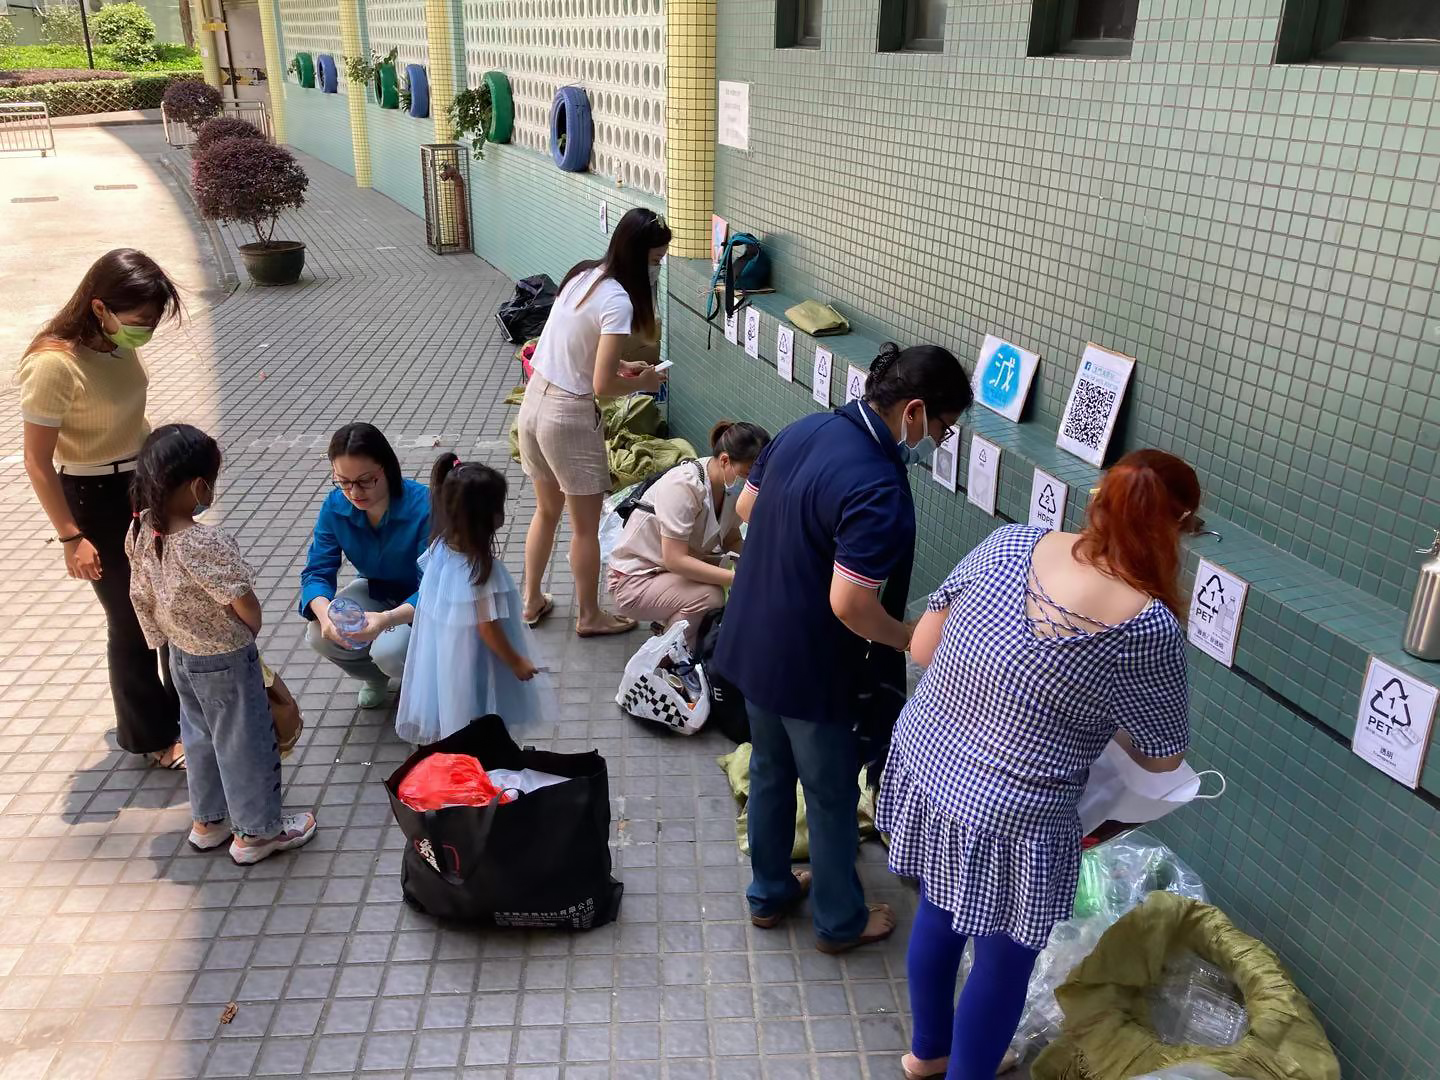 Macau for Waste Reduction - Leong says some parents bring their children to recycling events so they can learn how to recycle properly at an early age